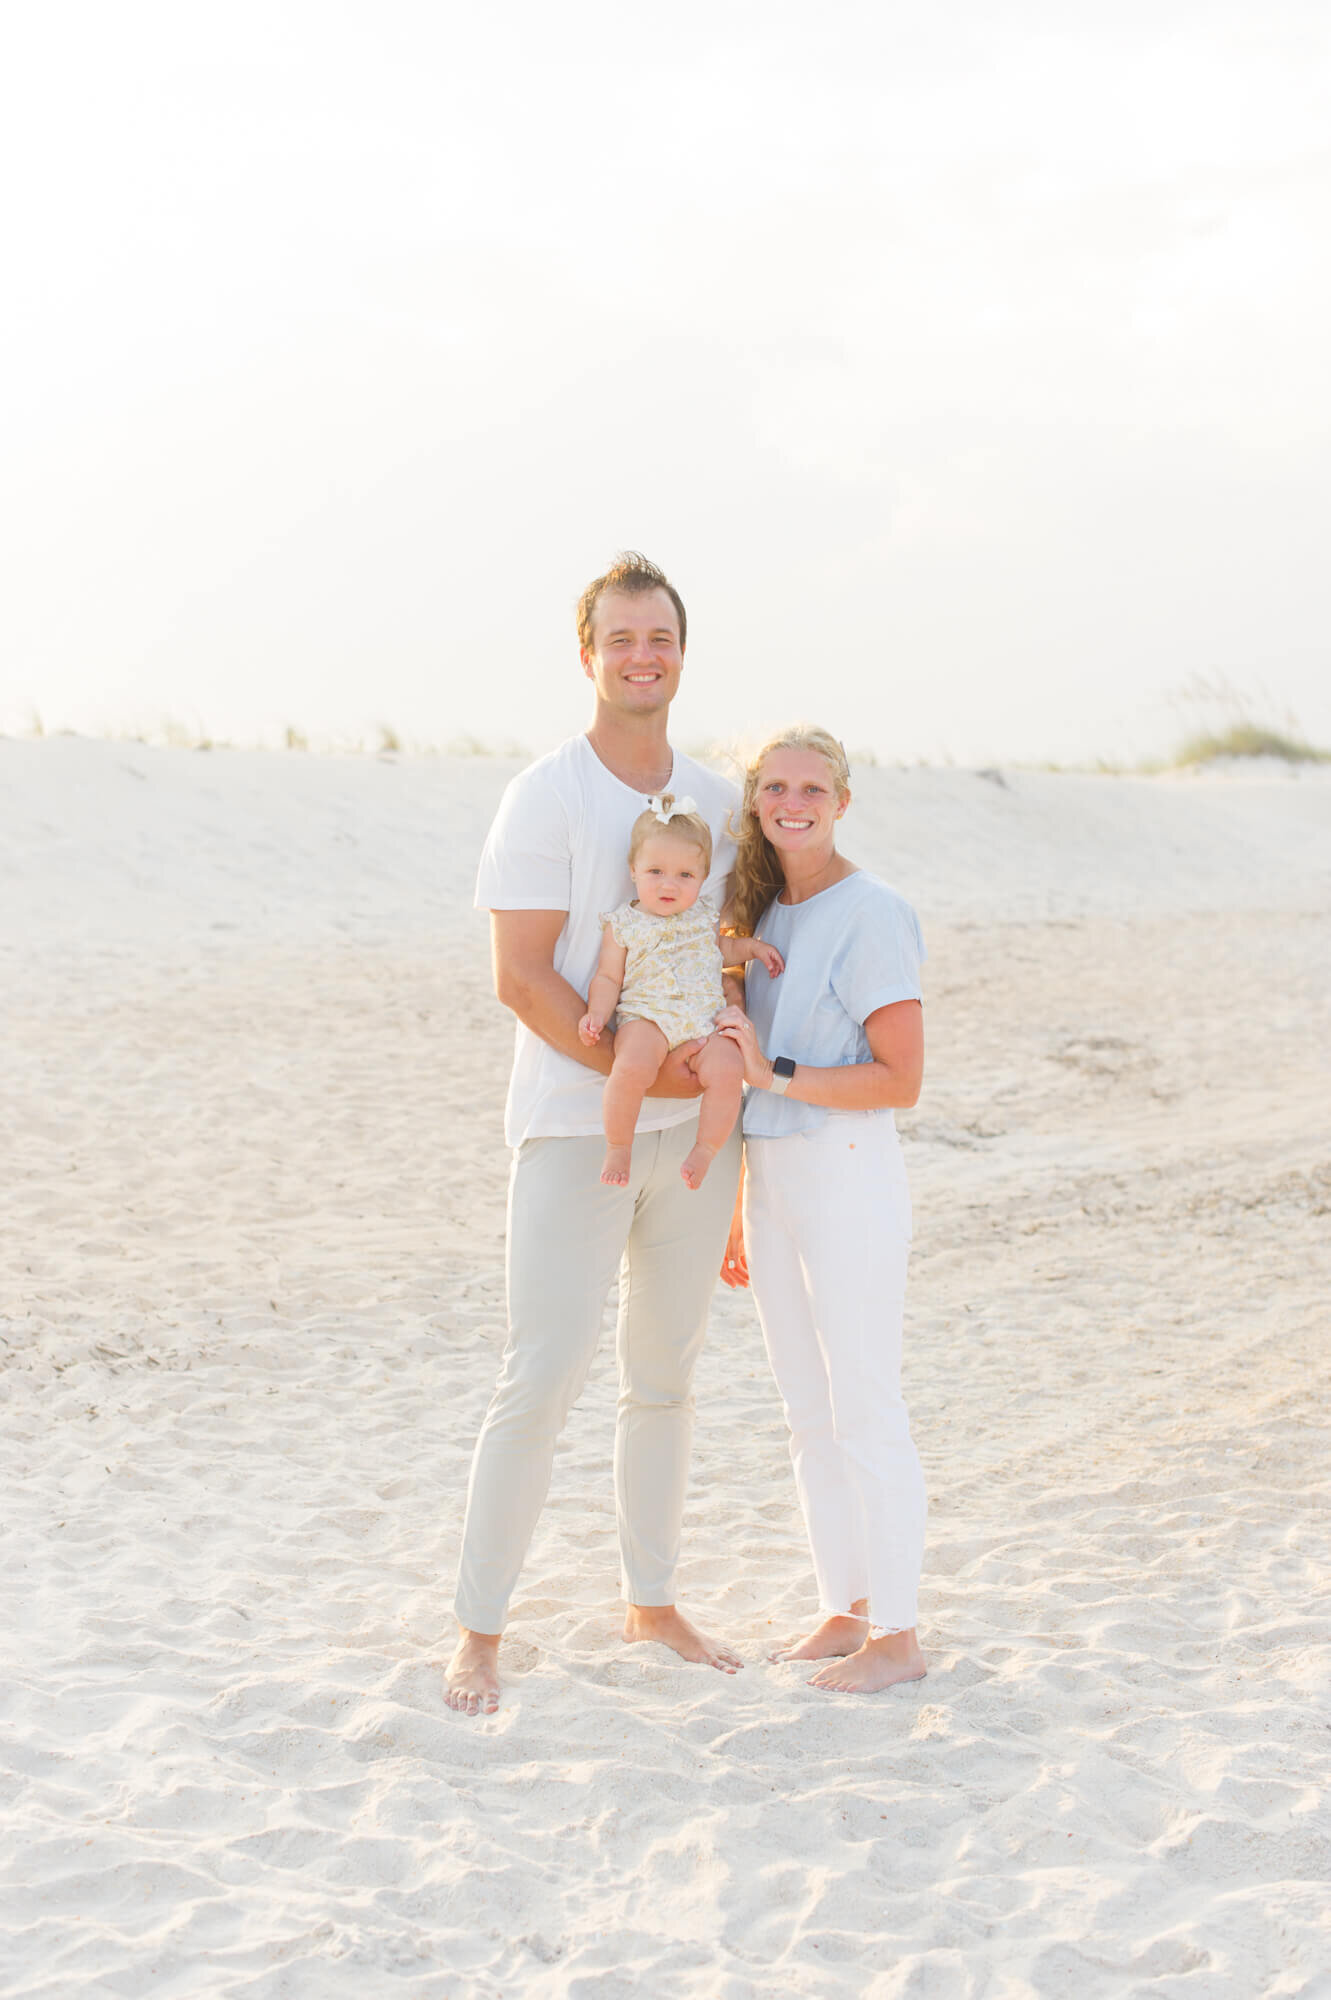 Family stands in the white sandy beach posing and smiling at the camera in beautiful creams and blues and yellow tones